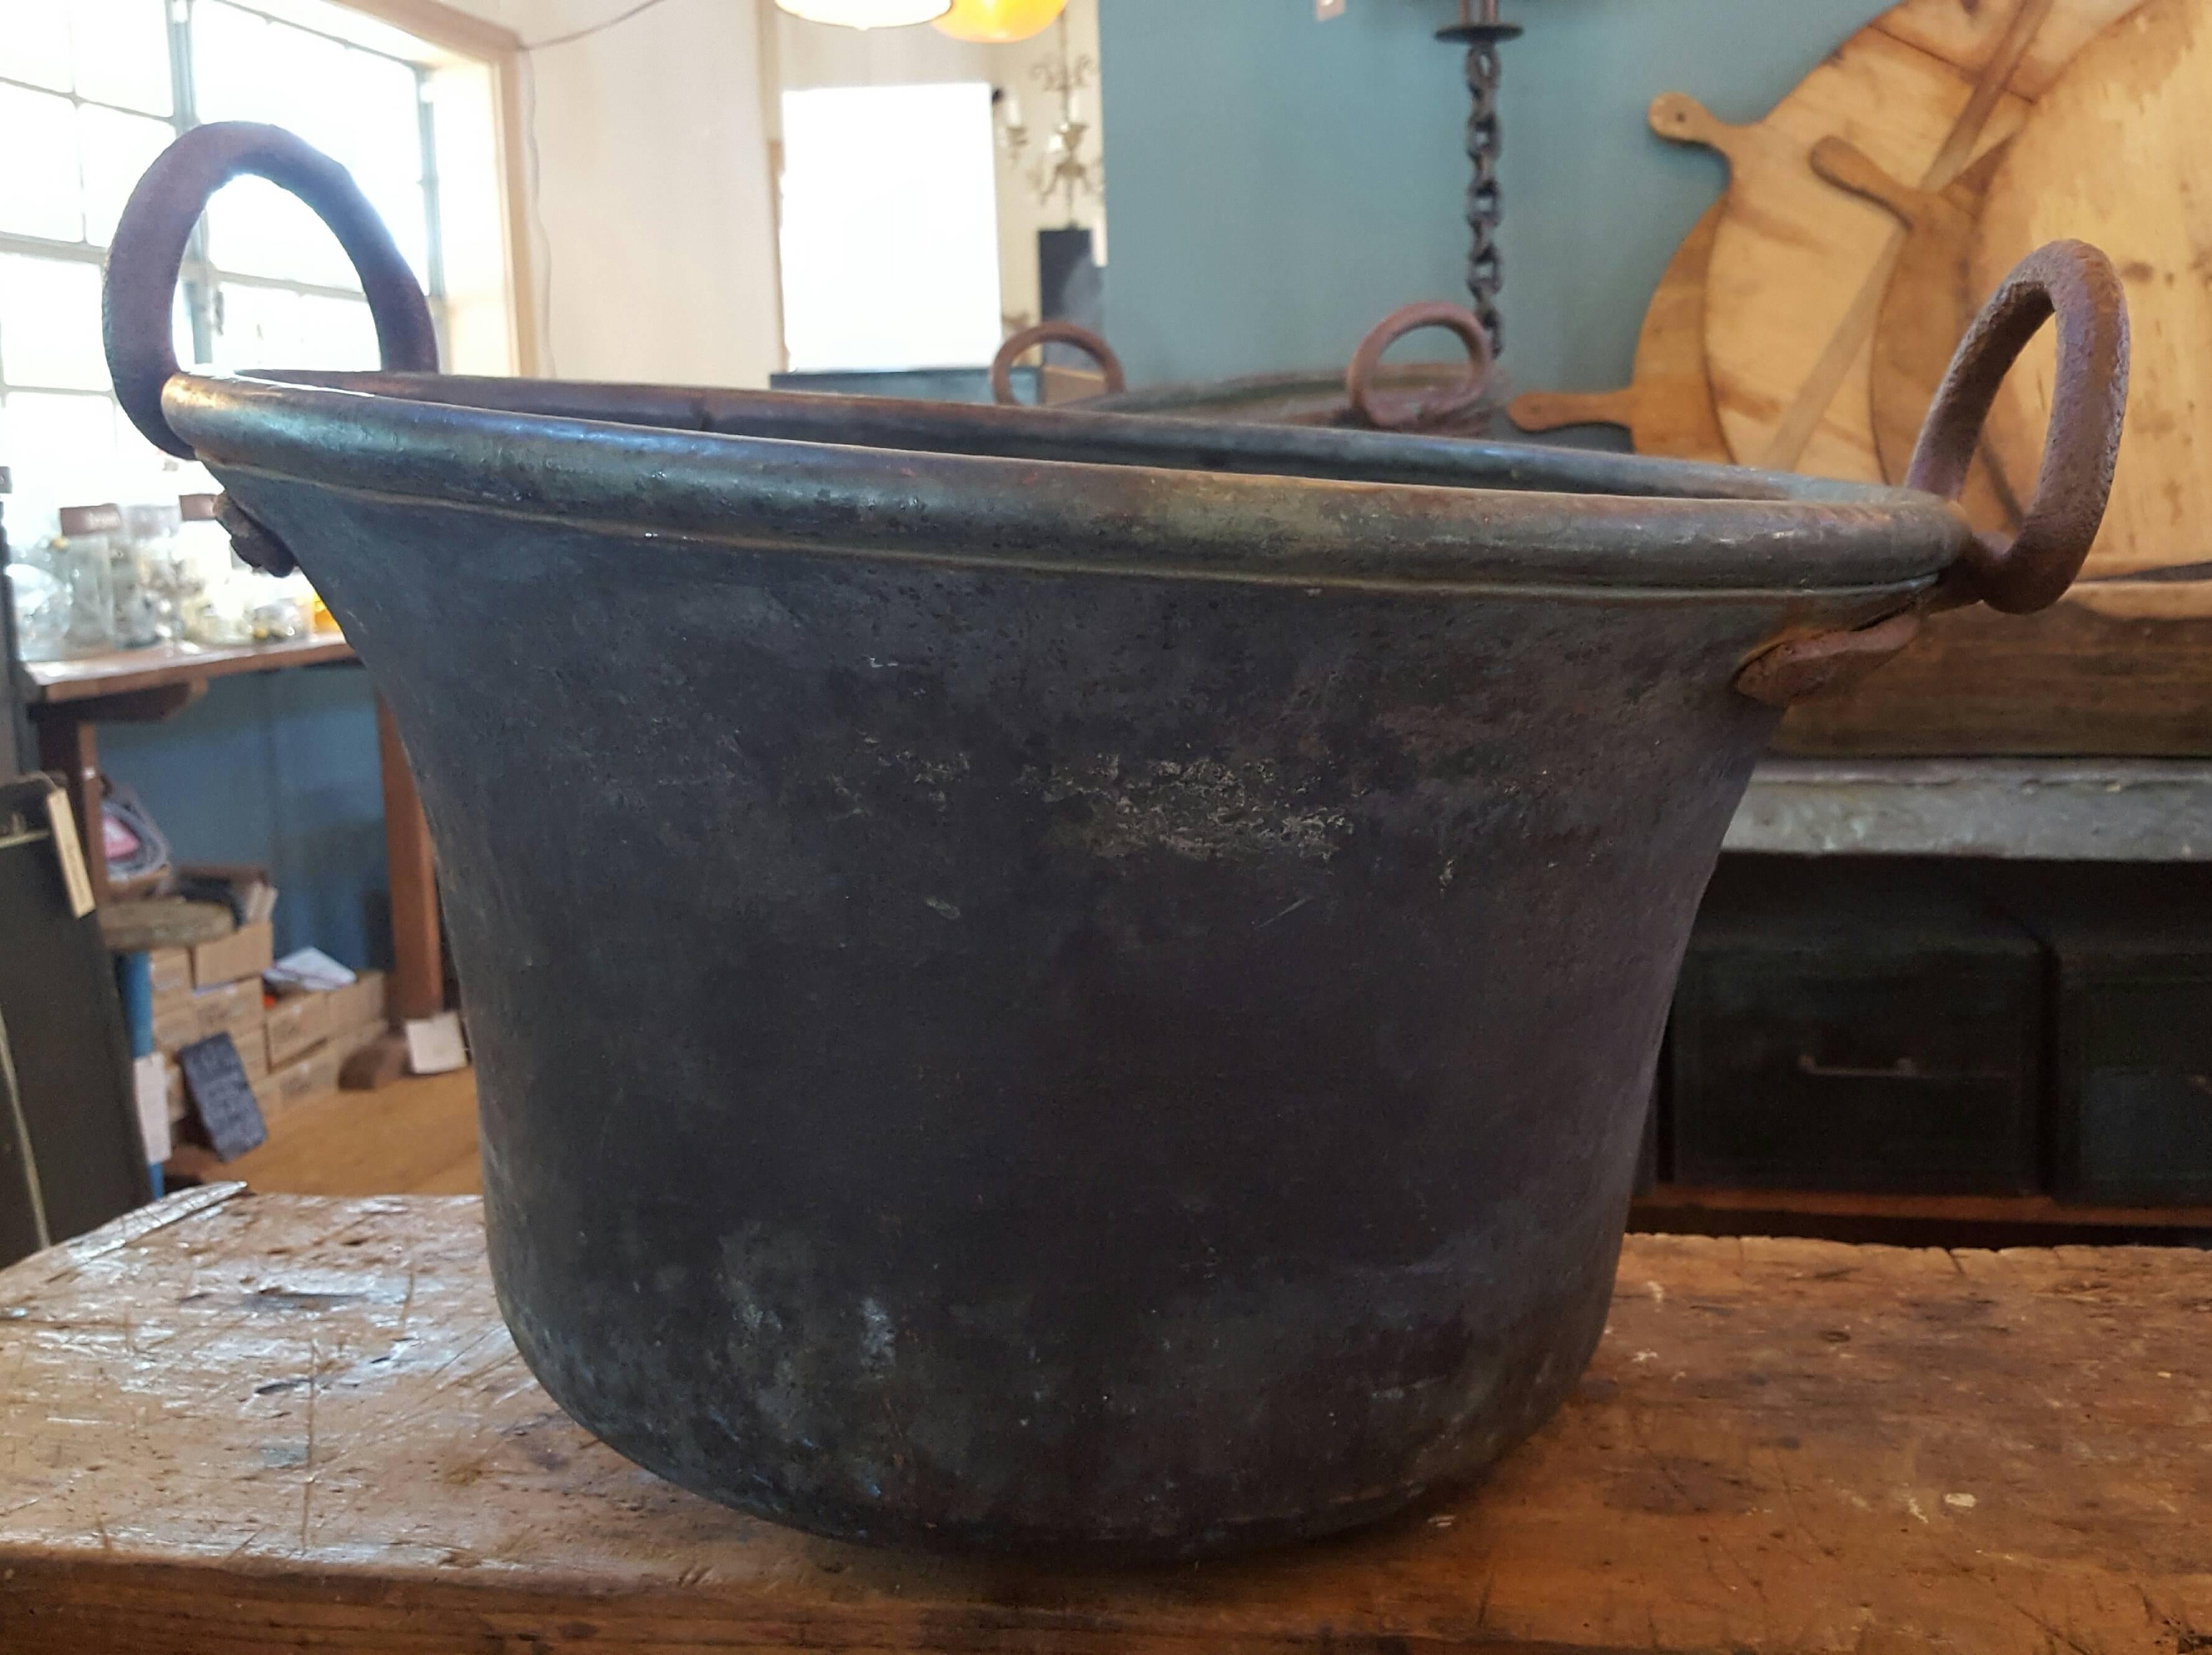 Rustic Copper Buckets with Iron Handles from France, circa 1890